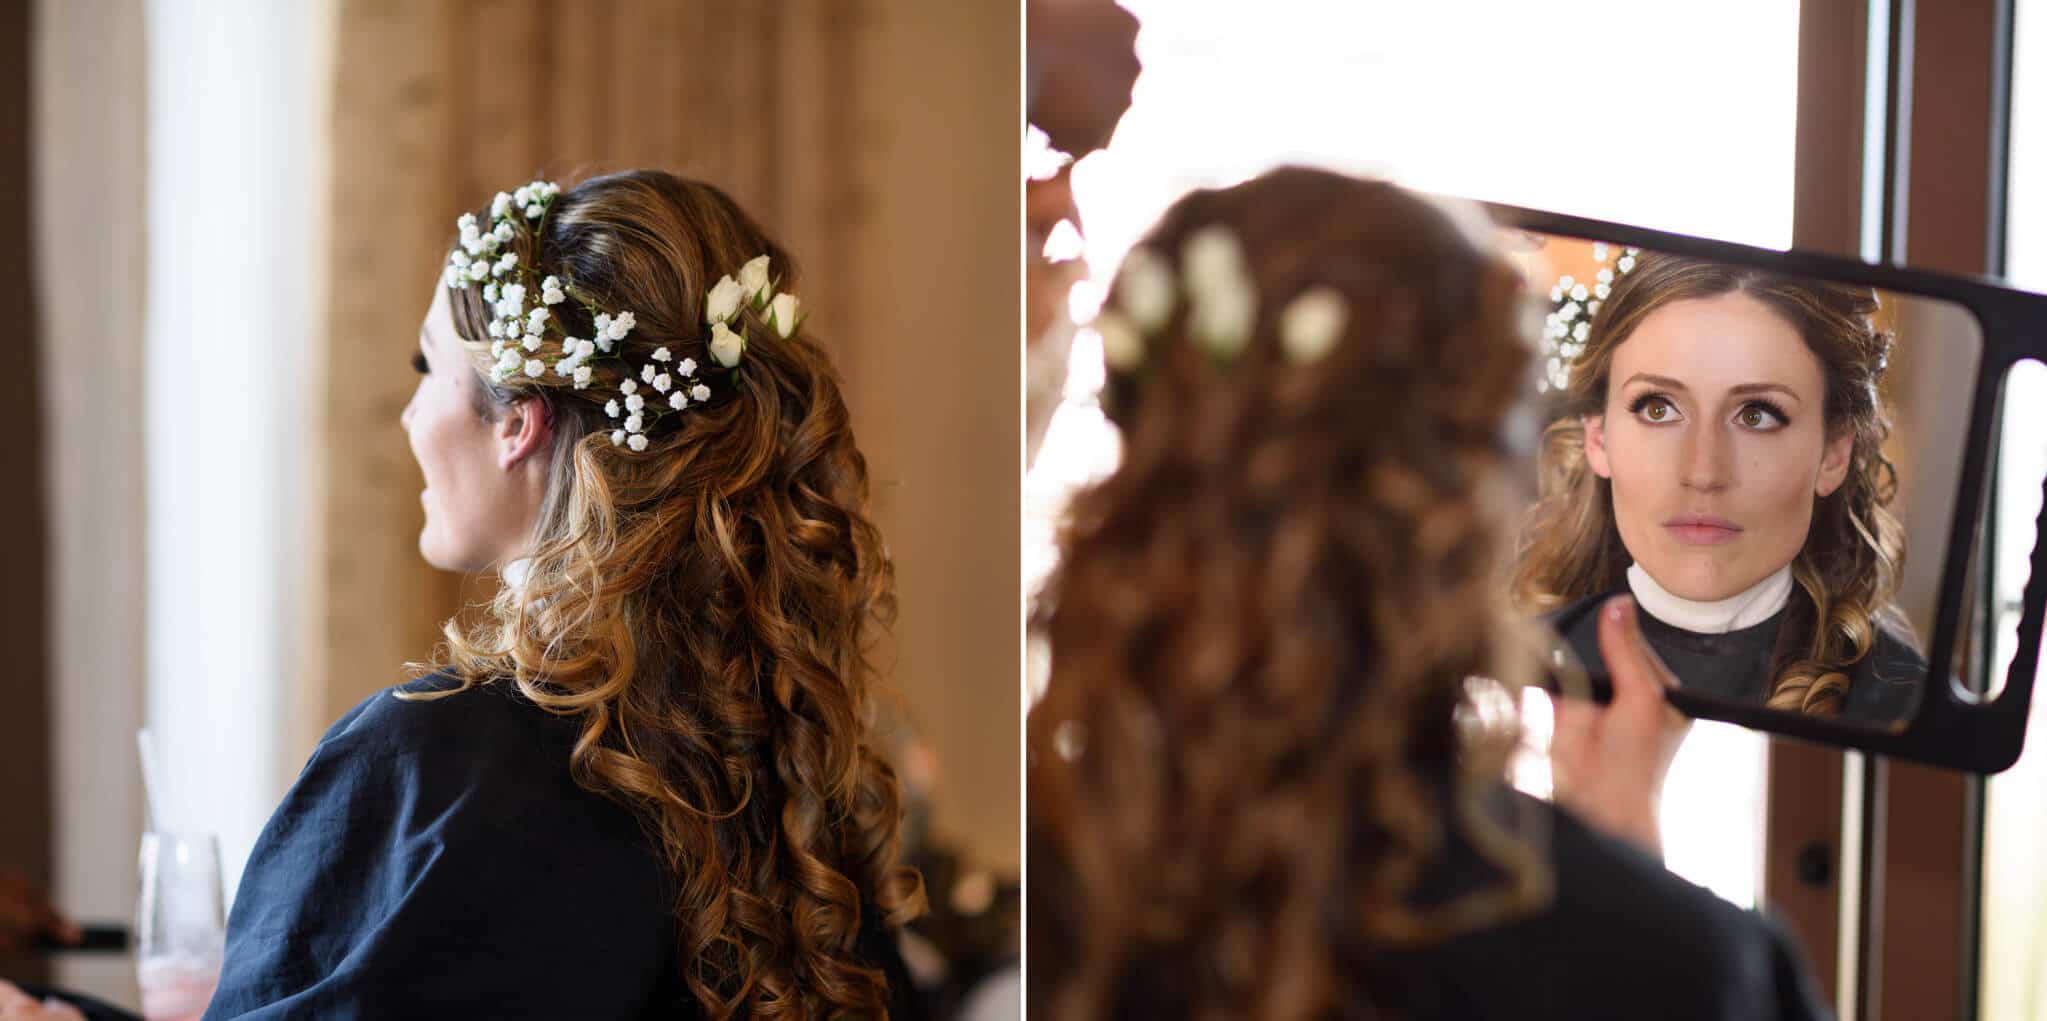 Bride checking out her hair in the mirror